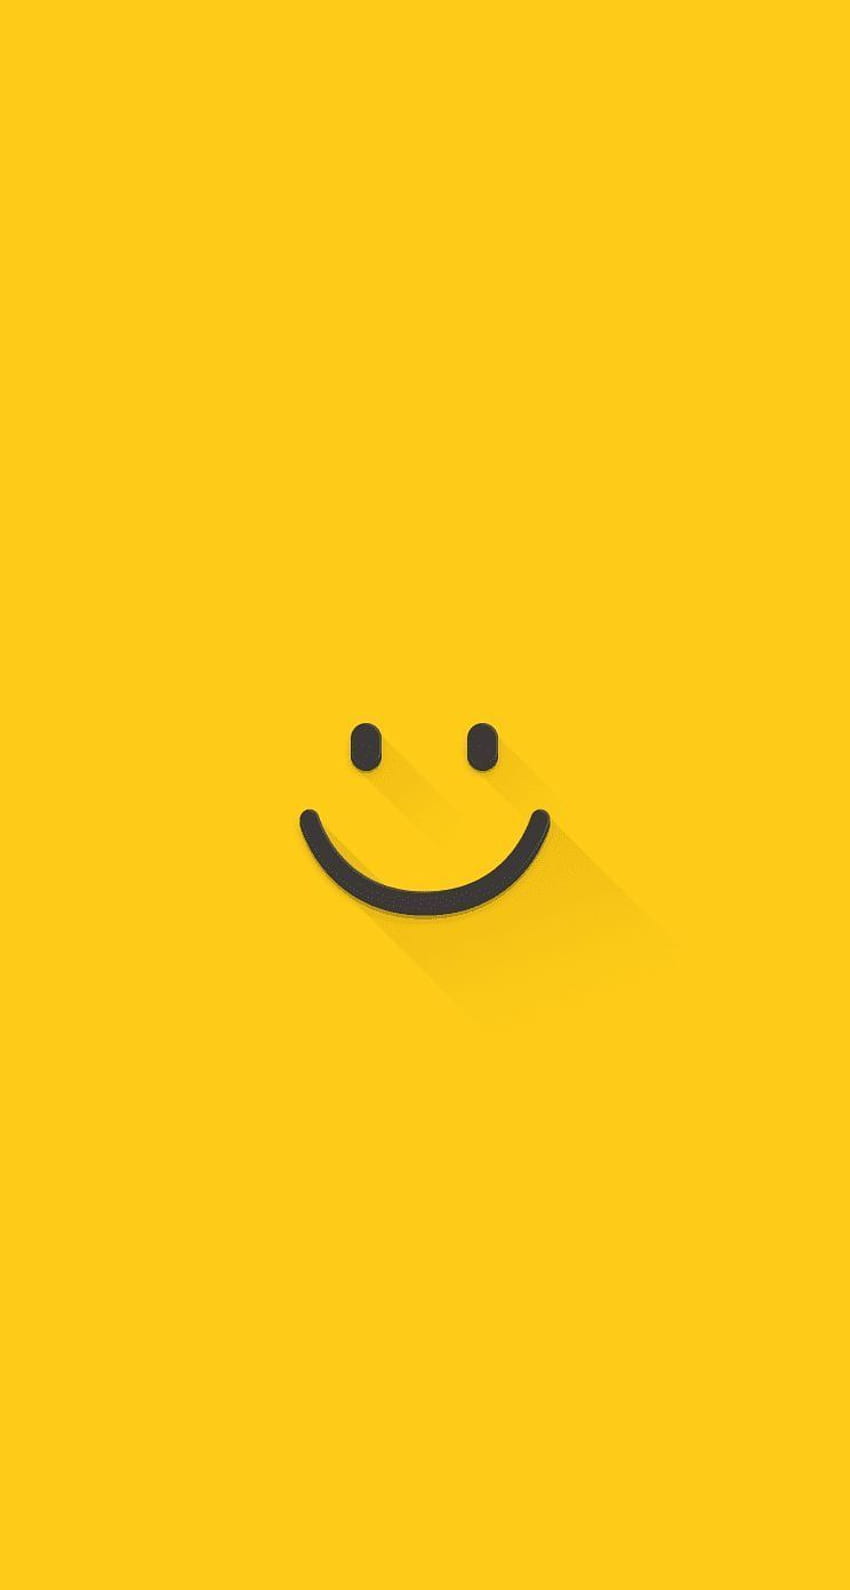 A yellow smiley face on an orange background - Smile